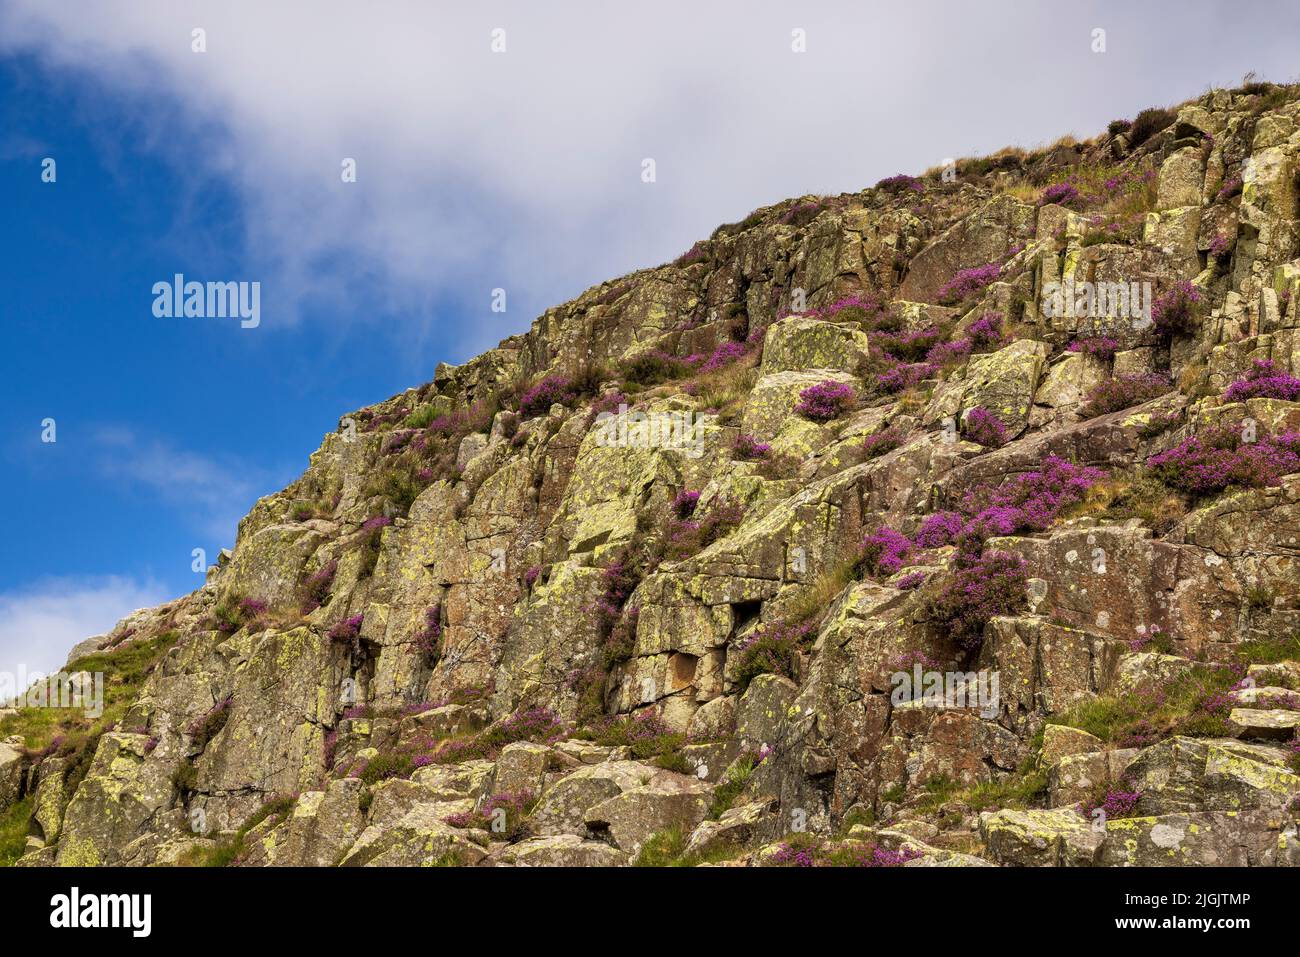 The igneous rock of the Whin Sill with flowering purple heather at Steel Rigg, Northumberland, England Stock Photo